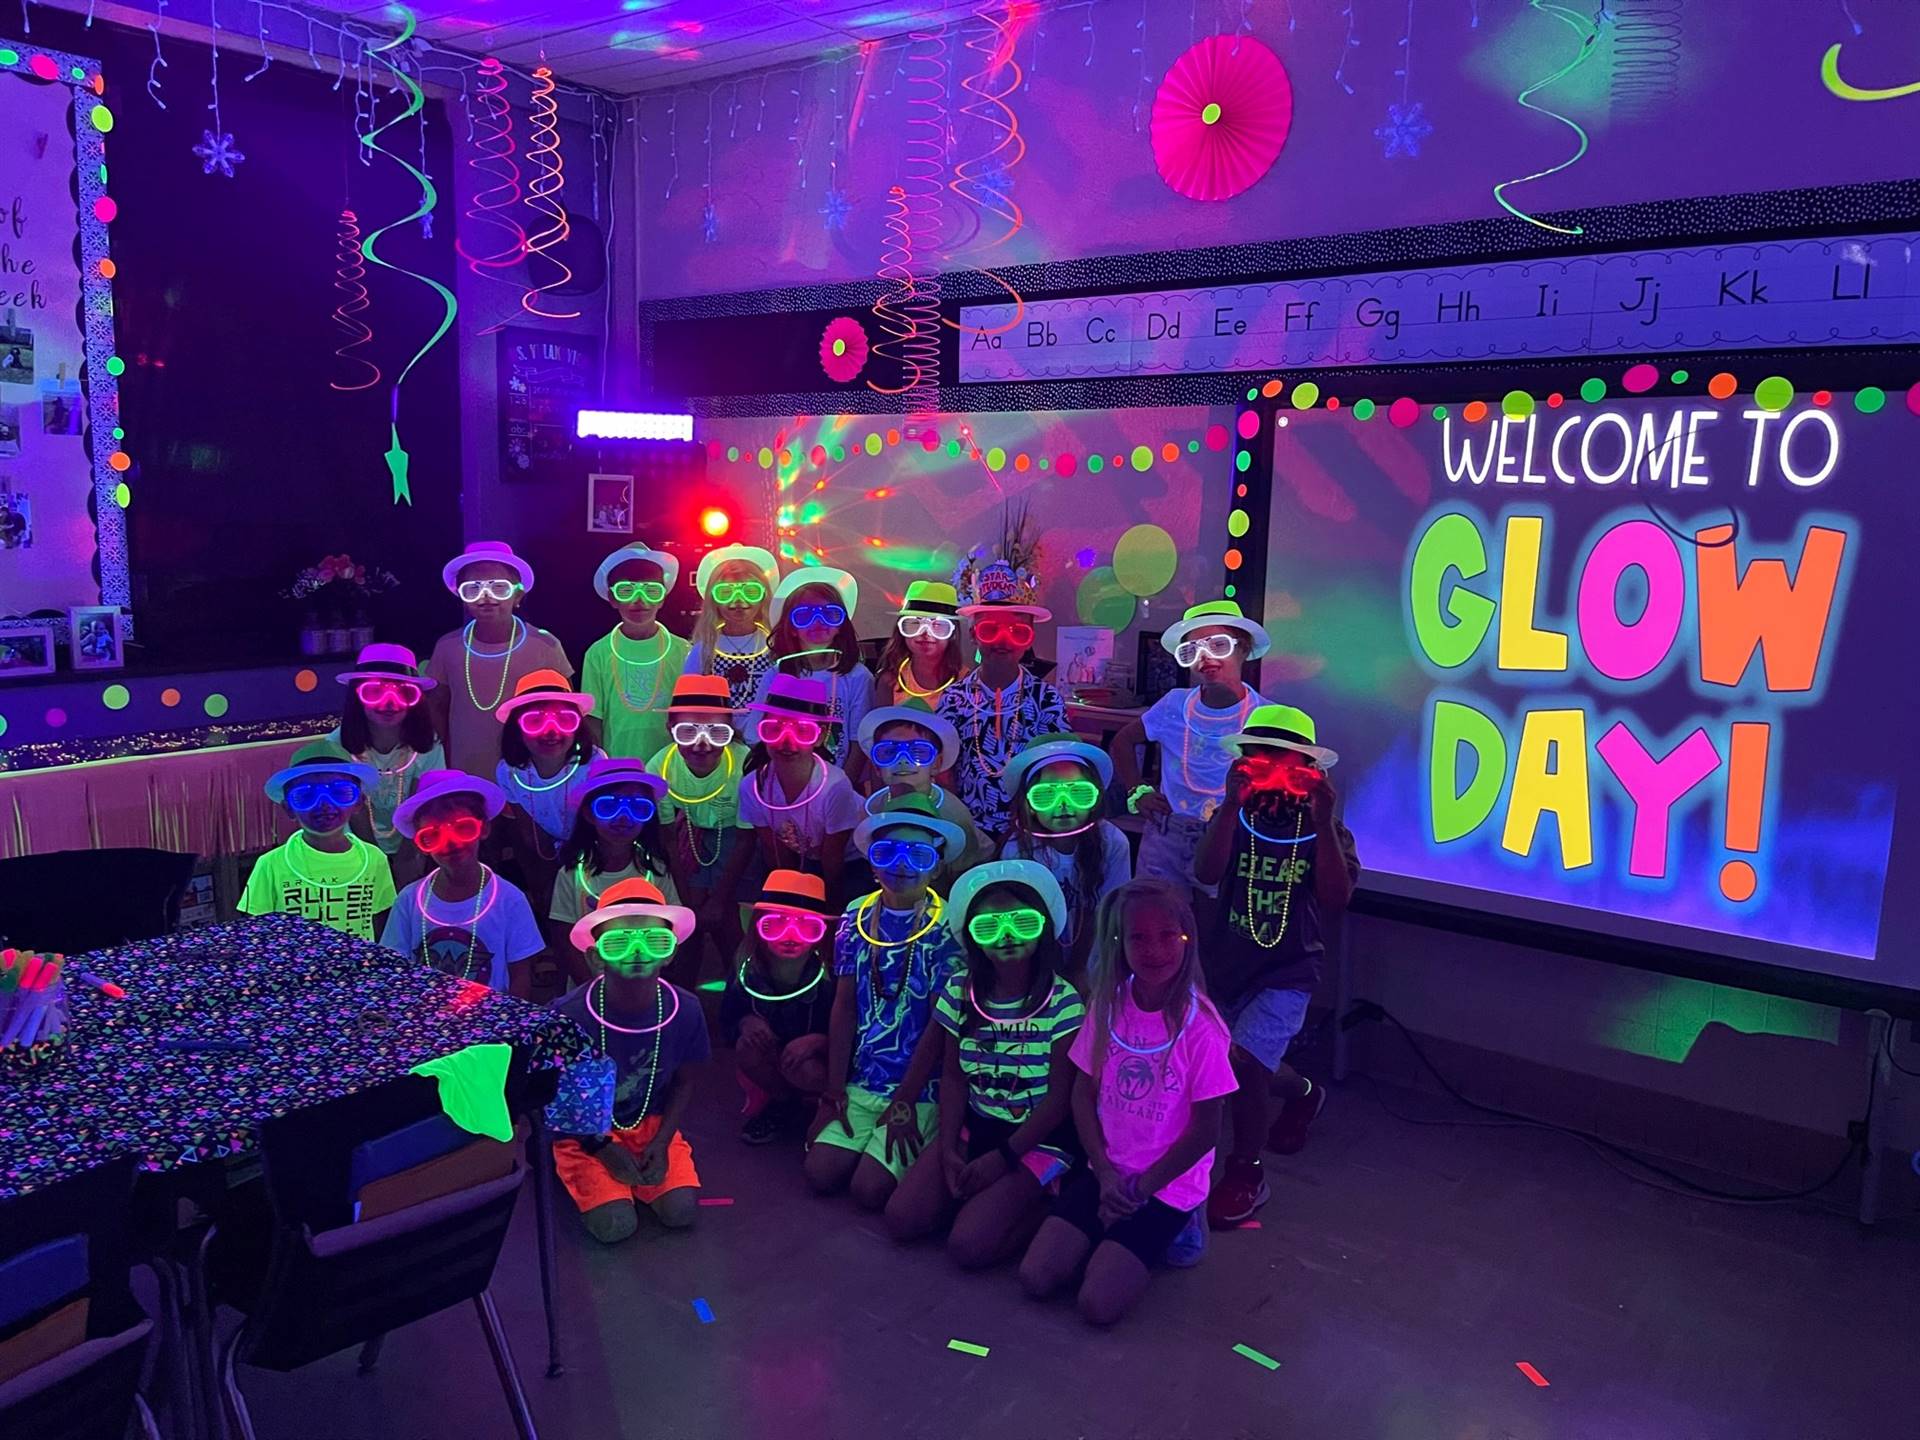 1C and Ms. Vulakovich celebrate learning with "Glow Day"